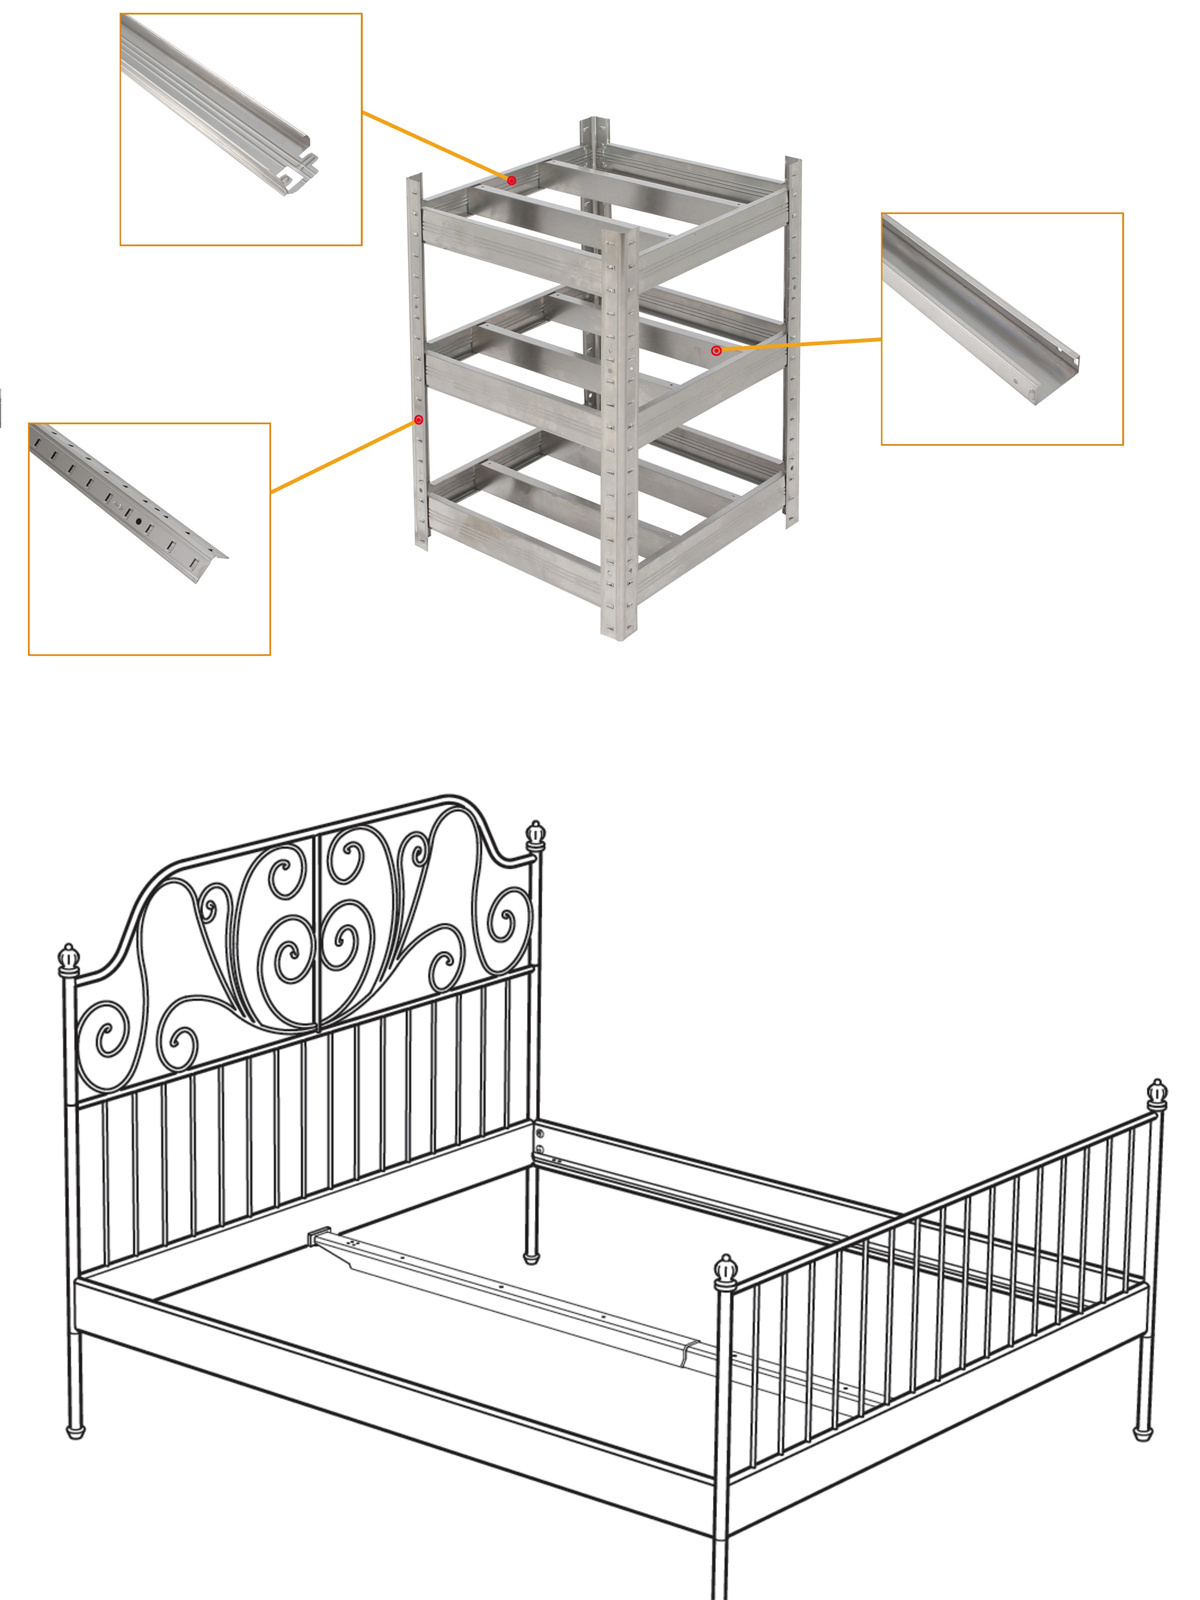 IKEA(storage rack bed frame) - CUSTOM PRECISION ROLL FORMING SOLUTIONS